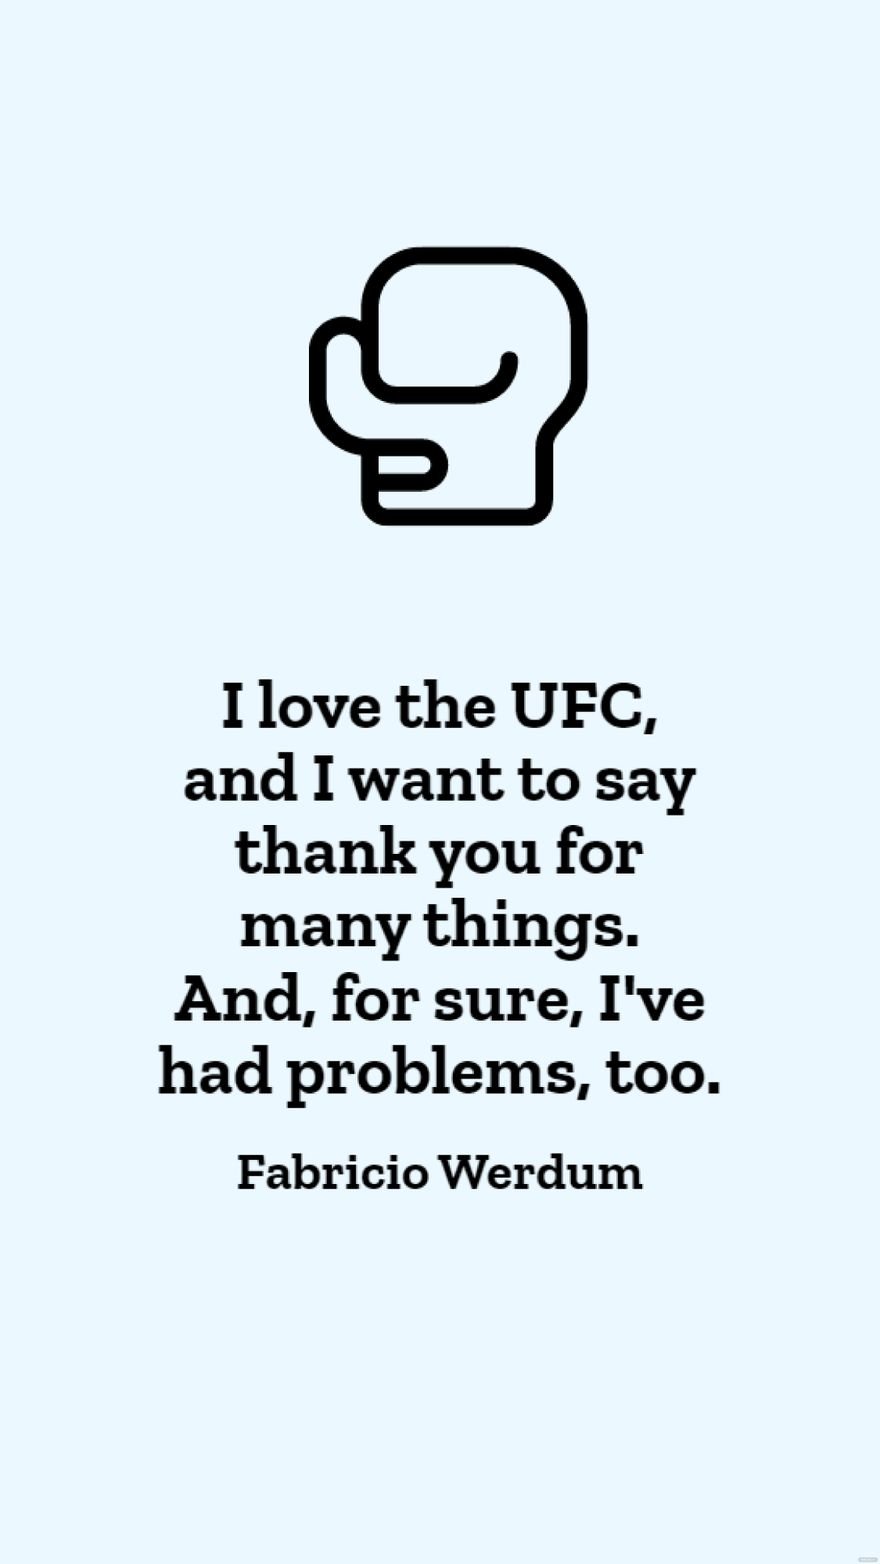 Free Fabricio Werdum - I love the UFC, and I want to say thank you for many things. And, for sure, I've had problems, too. in JPG